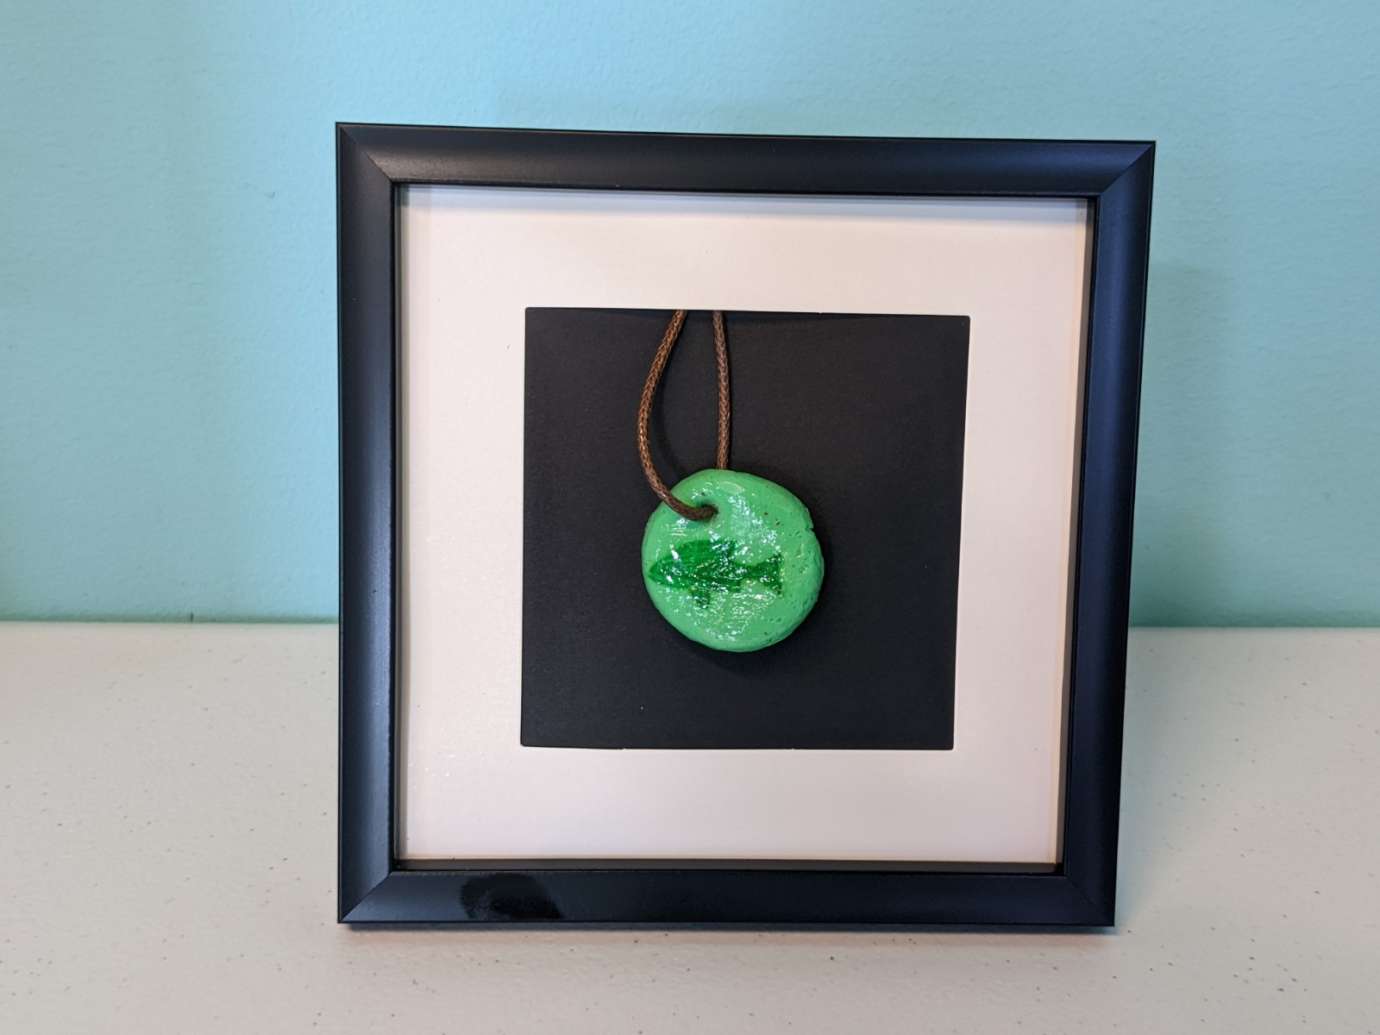 A framed green pendant necklace made by a member of the Abound Health Day Program